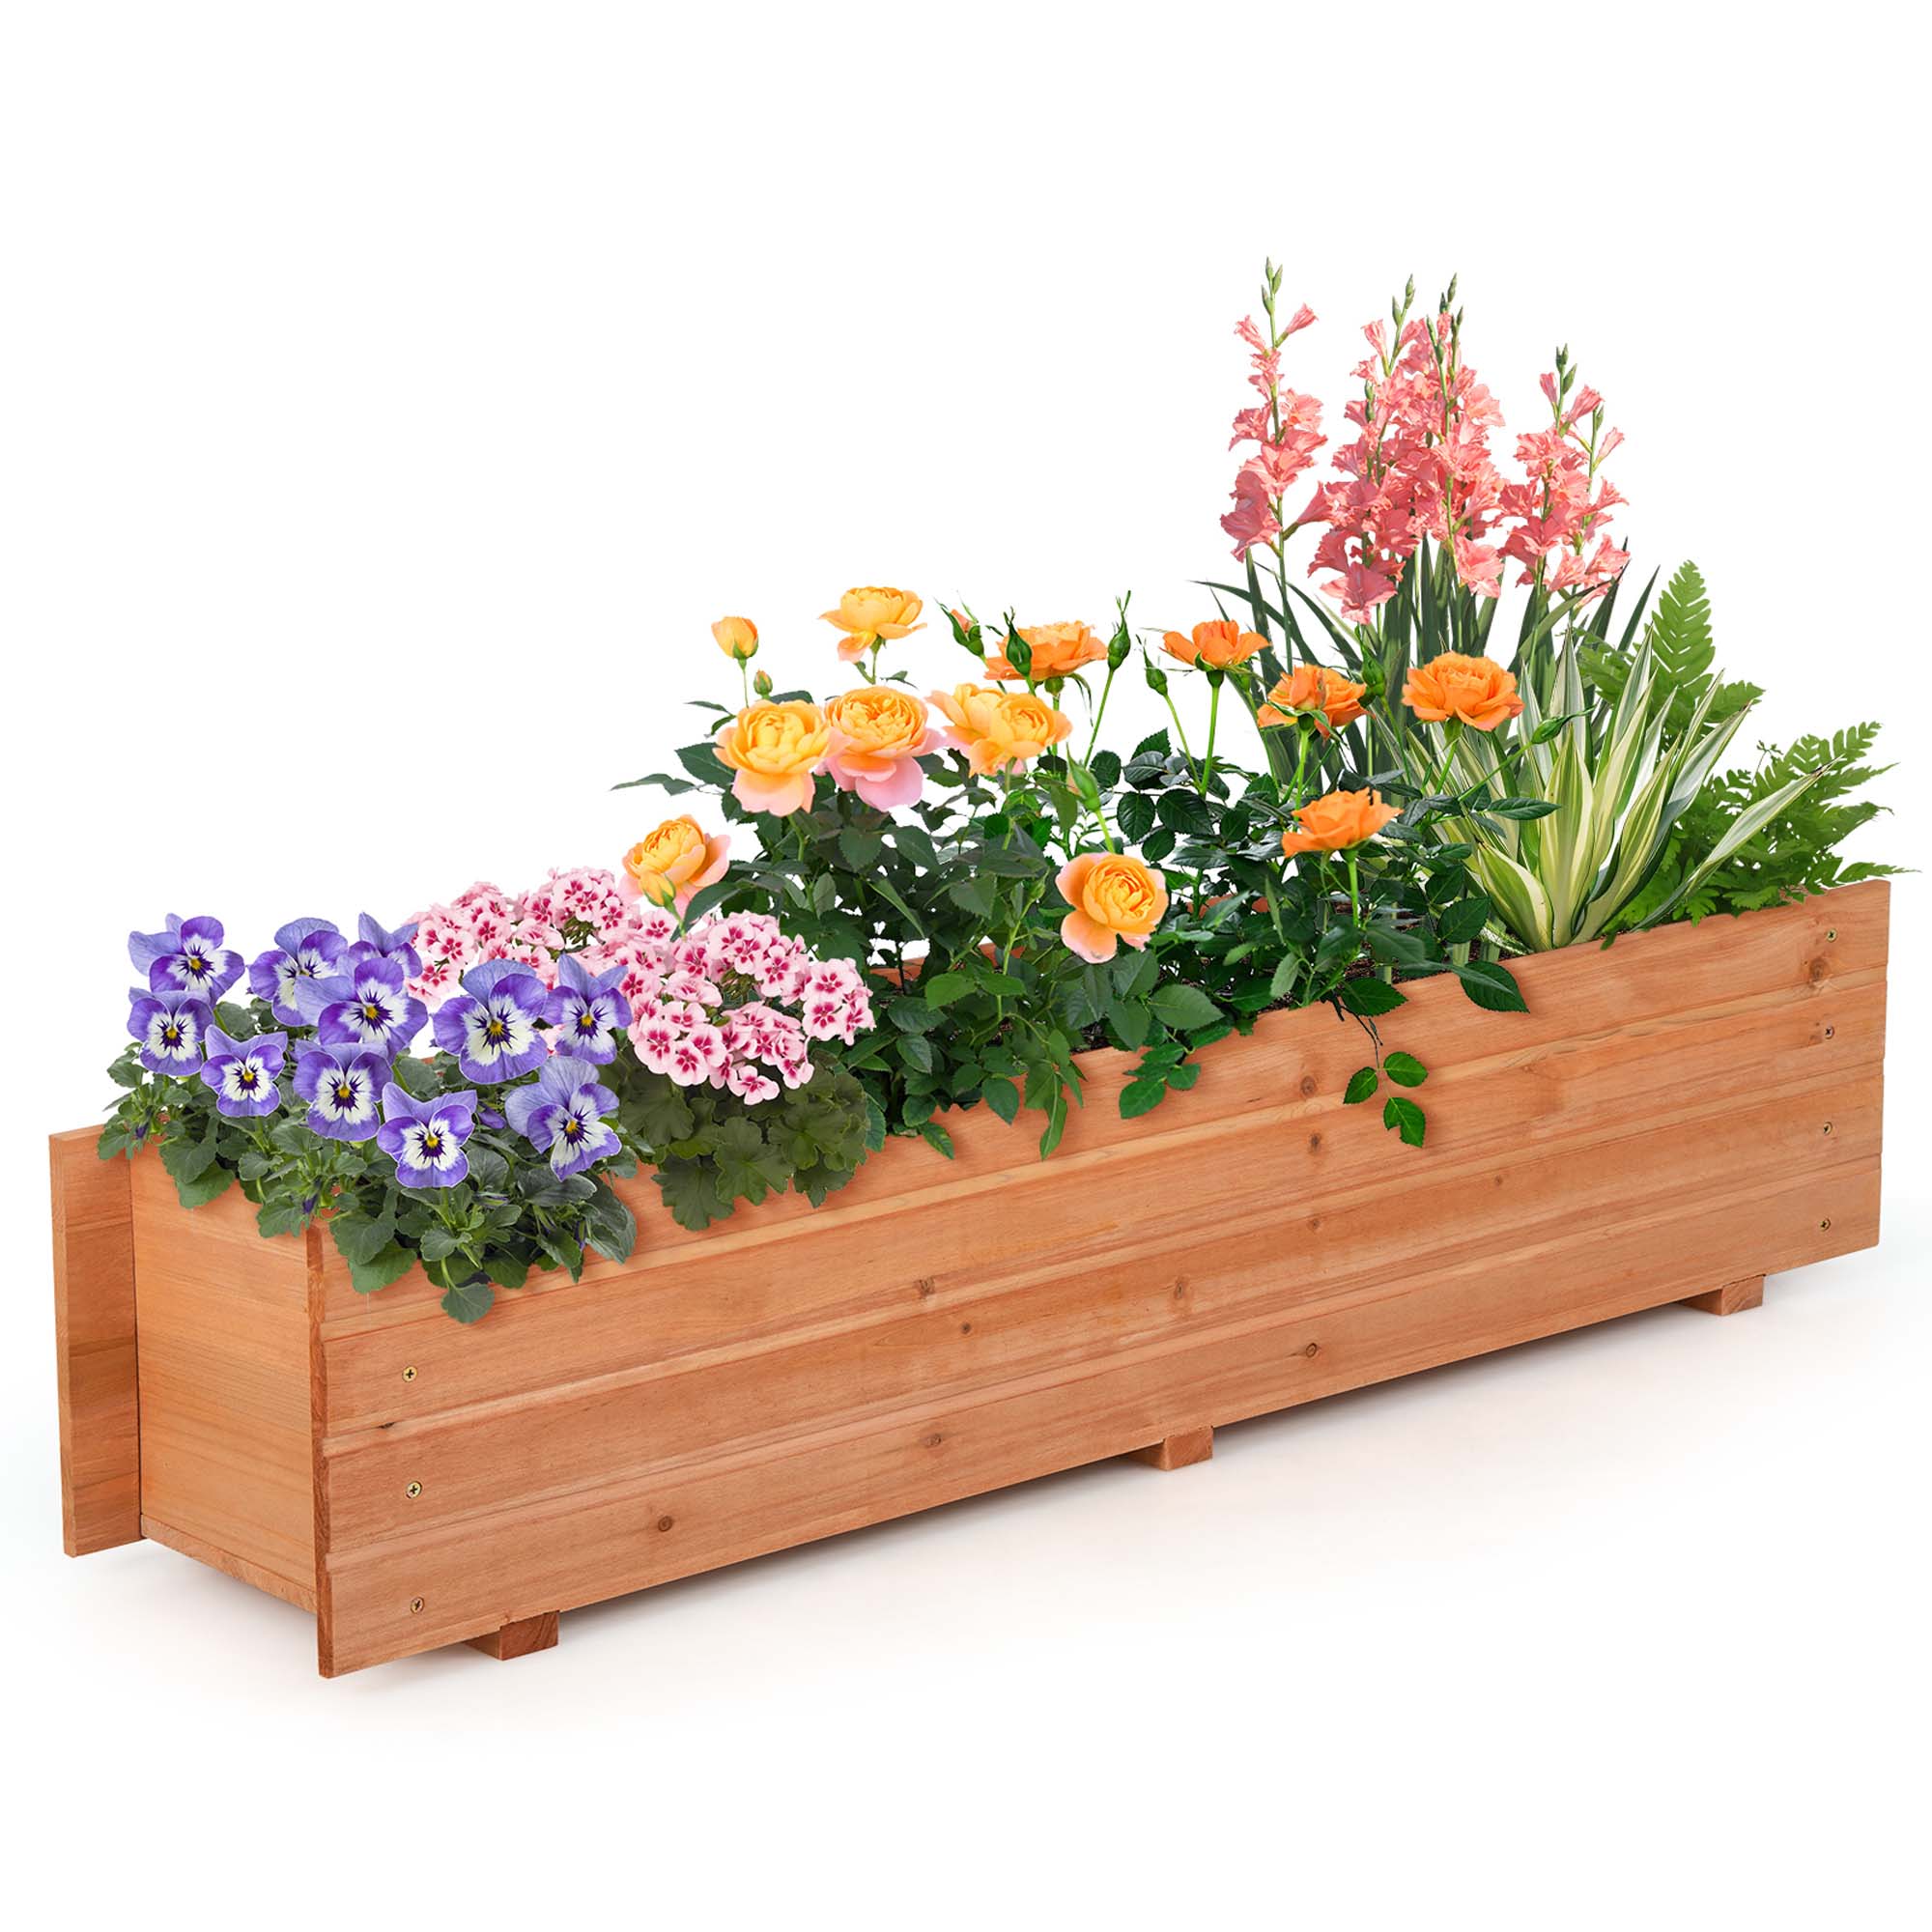 Costway Raised Garden Bed Wood Rectangular Planter Box with 2 Drainage Holes Outdoor - image 1 of 10